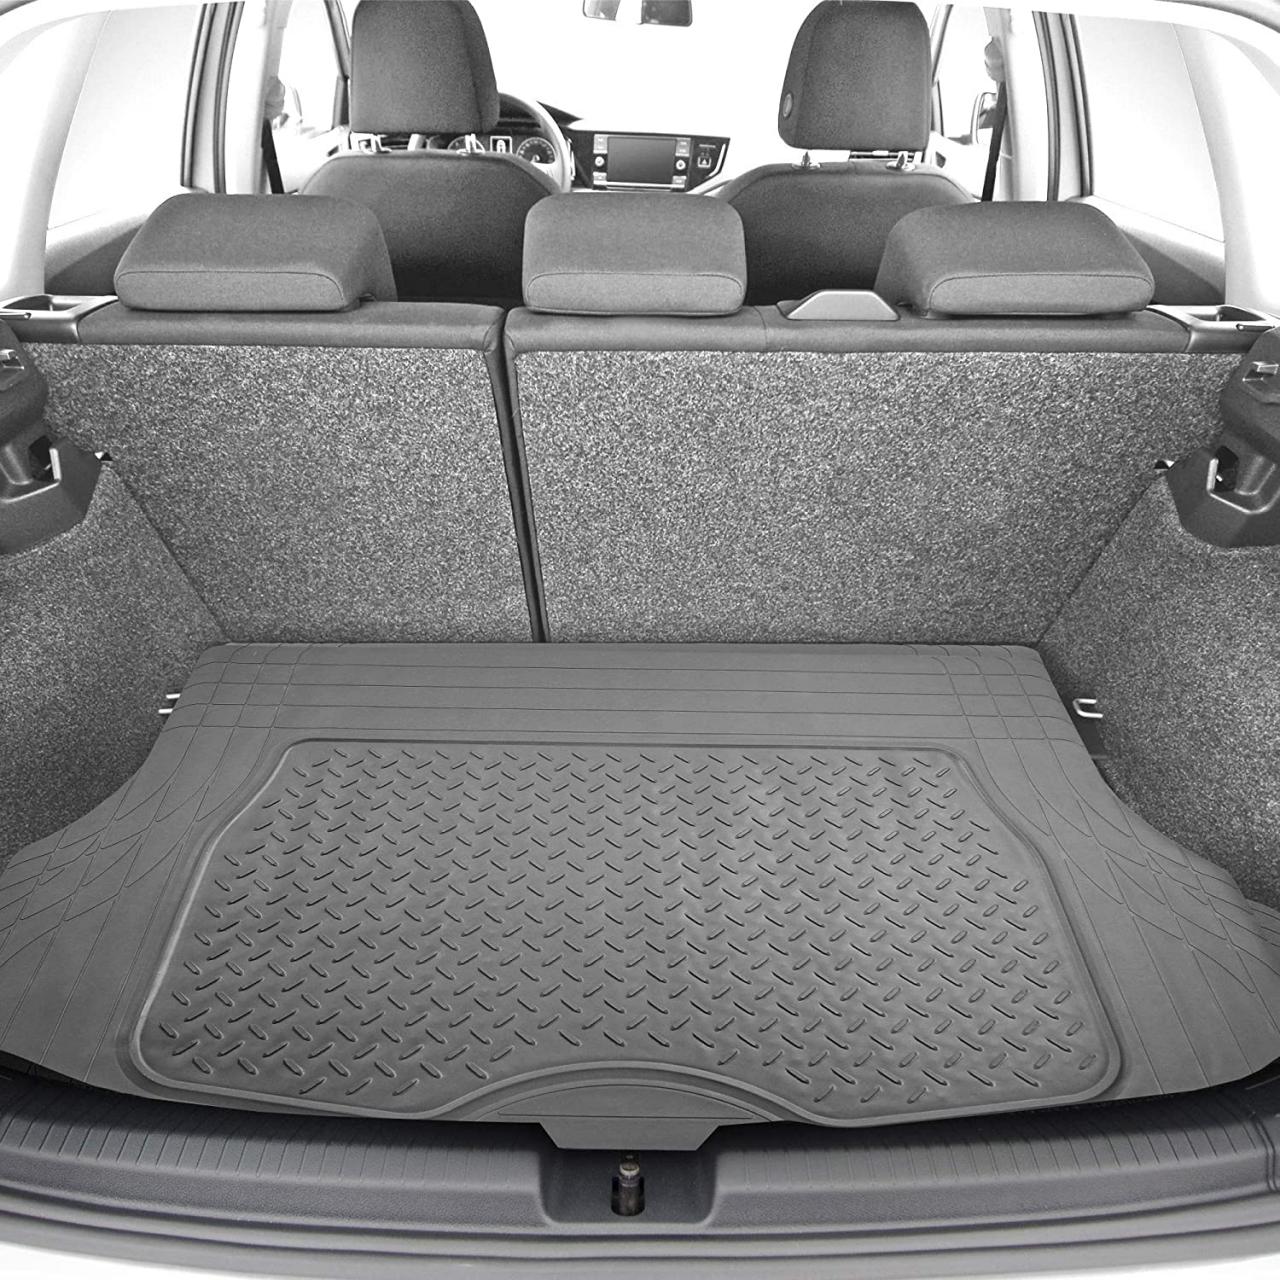 Buy FH Group Semi-Custom Liners Trimmable All Weather Full Set Car Floor  Mats (Gray) w. Premium Trimmable All Season Cargo Liner (Gray) - Universal  Fit for Cars Trucks and SUVs Online in